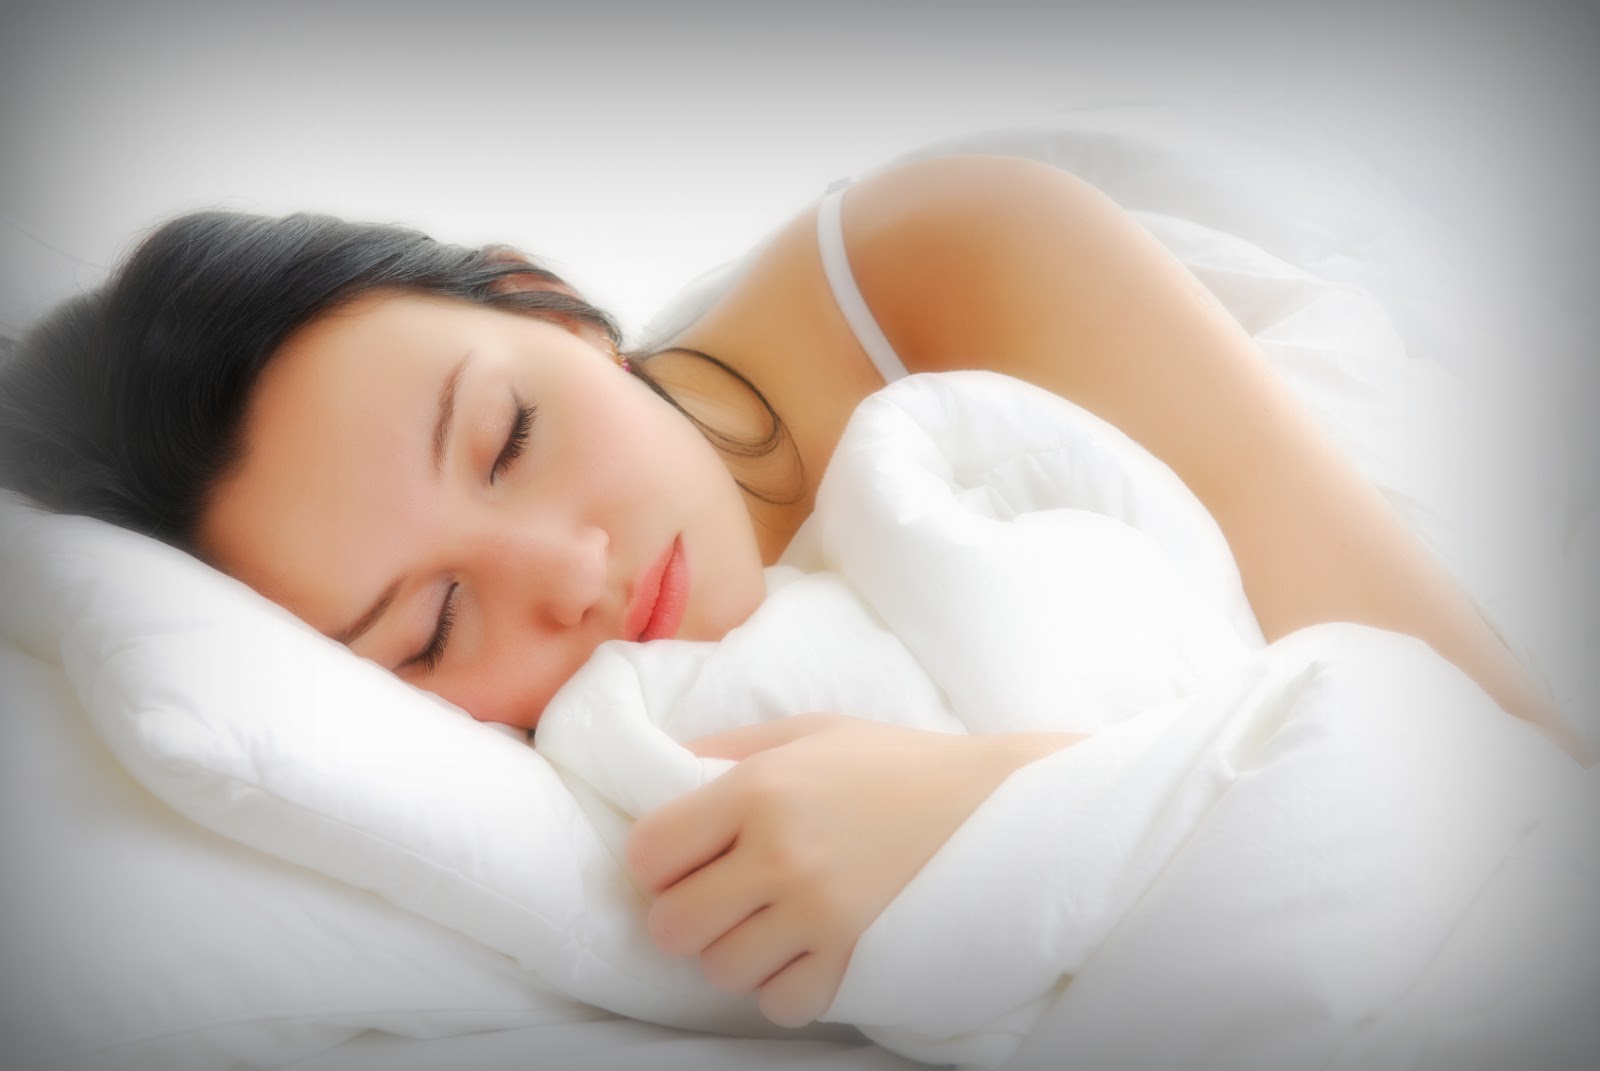 Image: How to Get More Quality Sleep (Video)